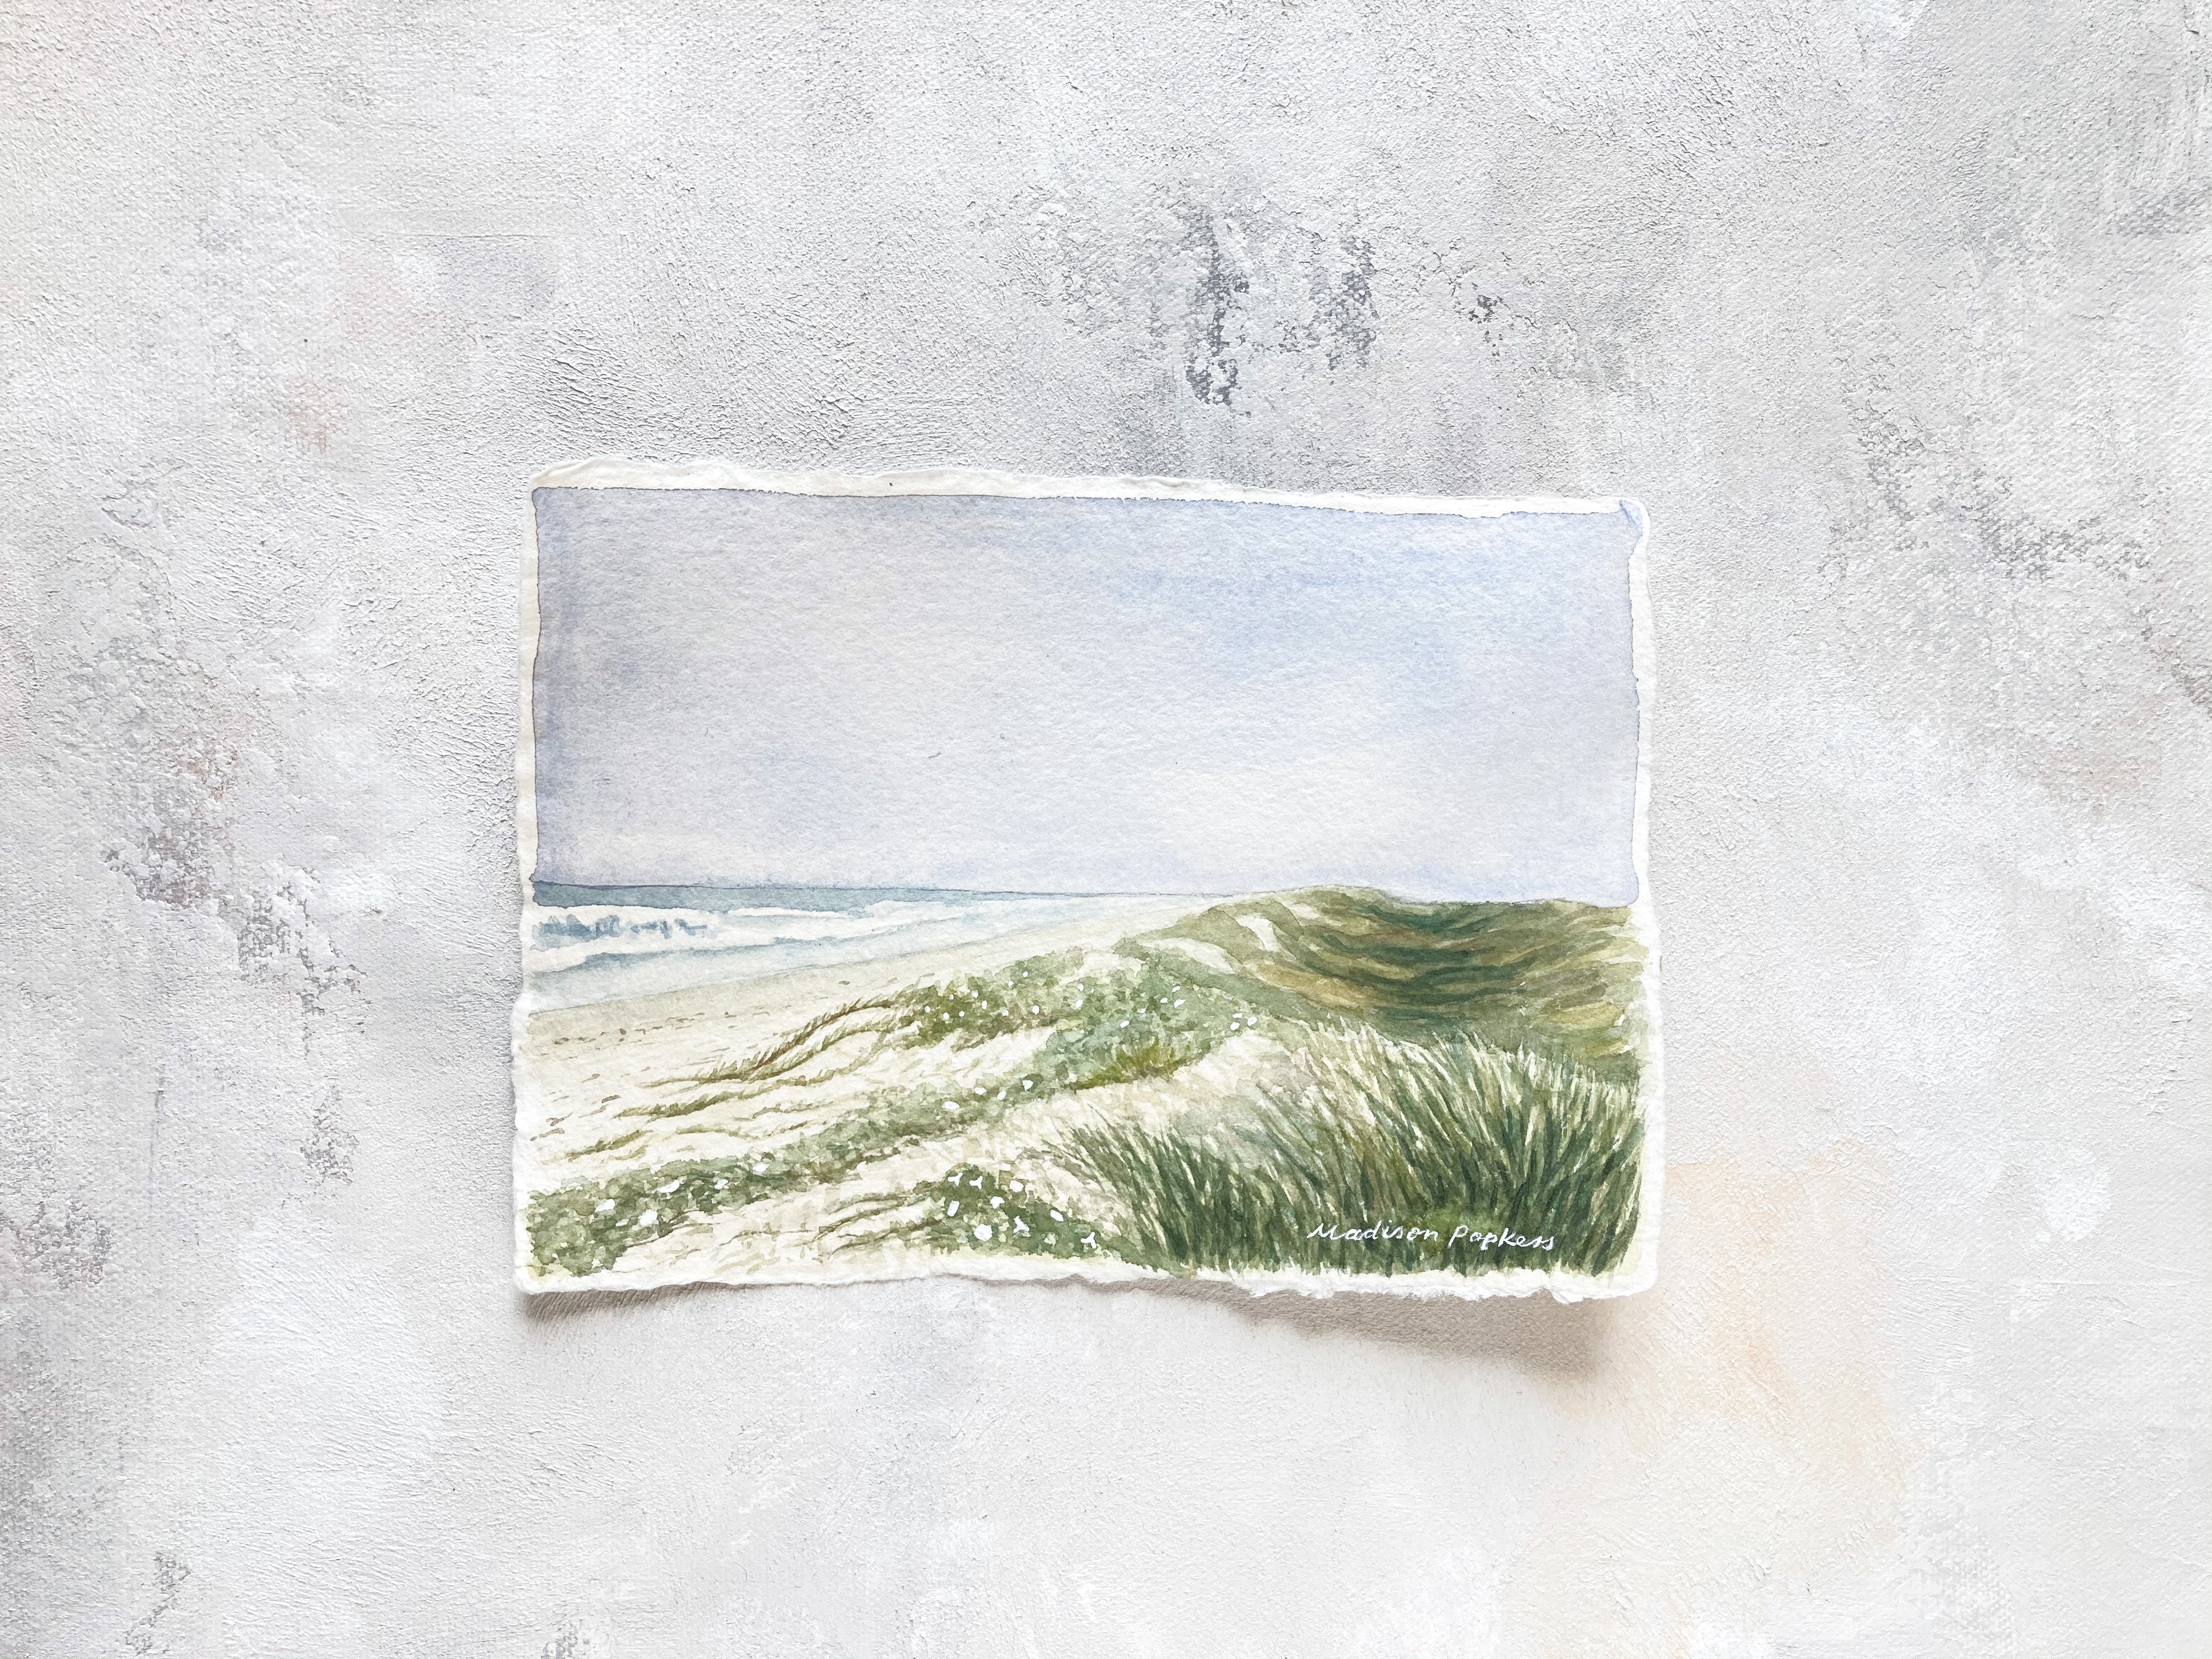 5x7 original watercolor of flower covered sand dunes, on handmade deckled-edge paper